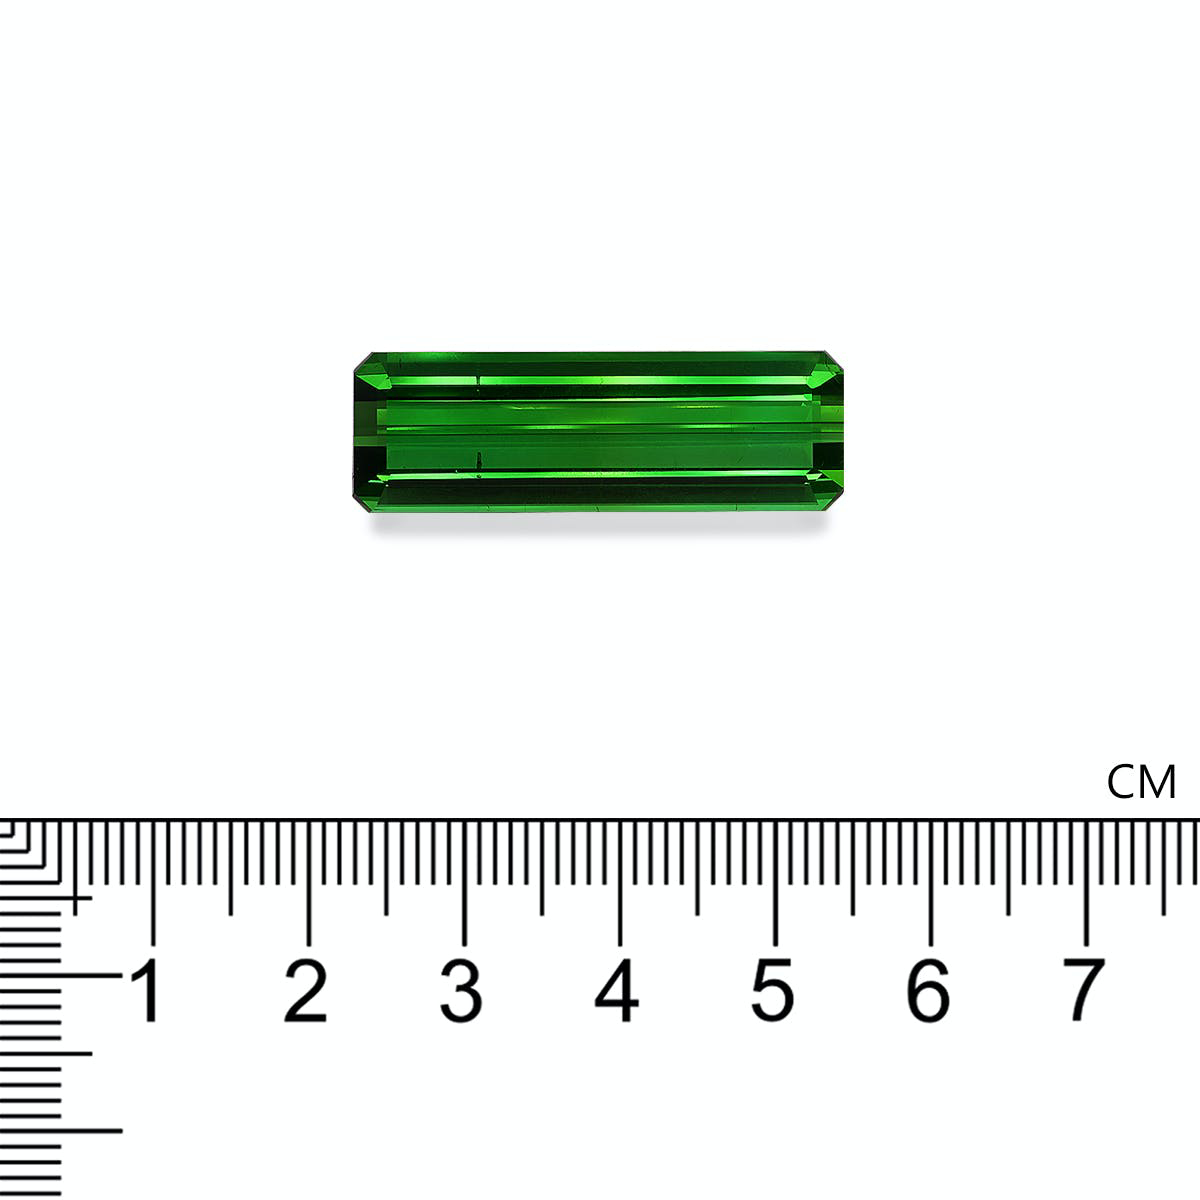 Picture of Green Tourmaline 25.02ct (TG0854)